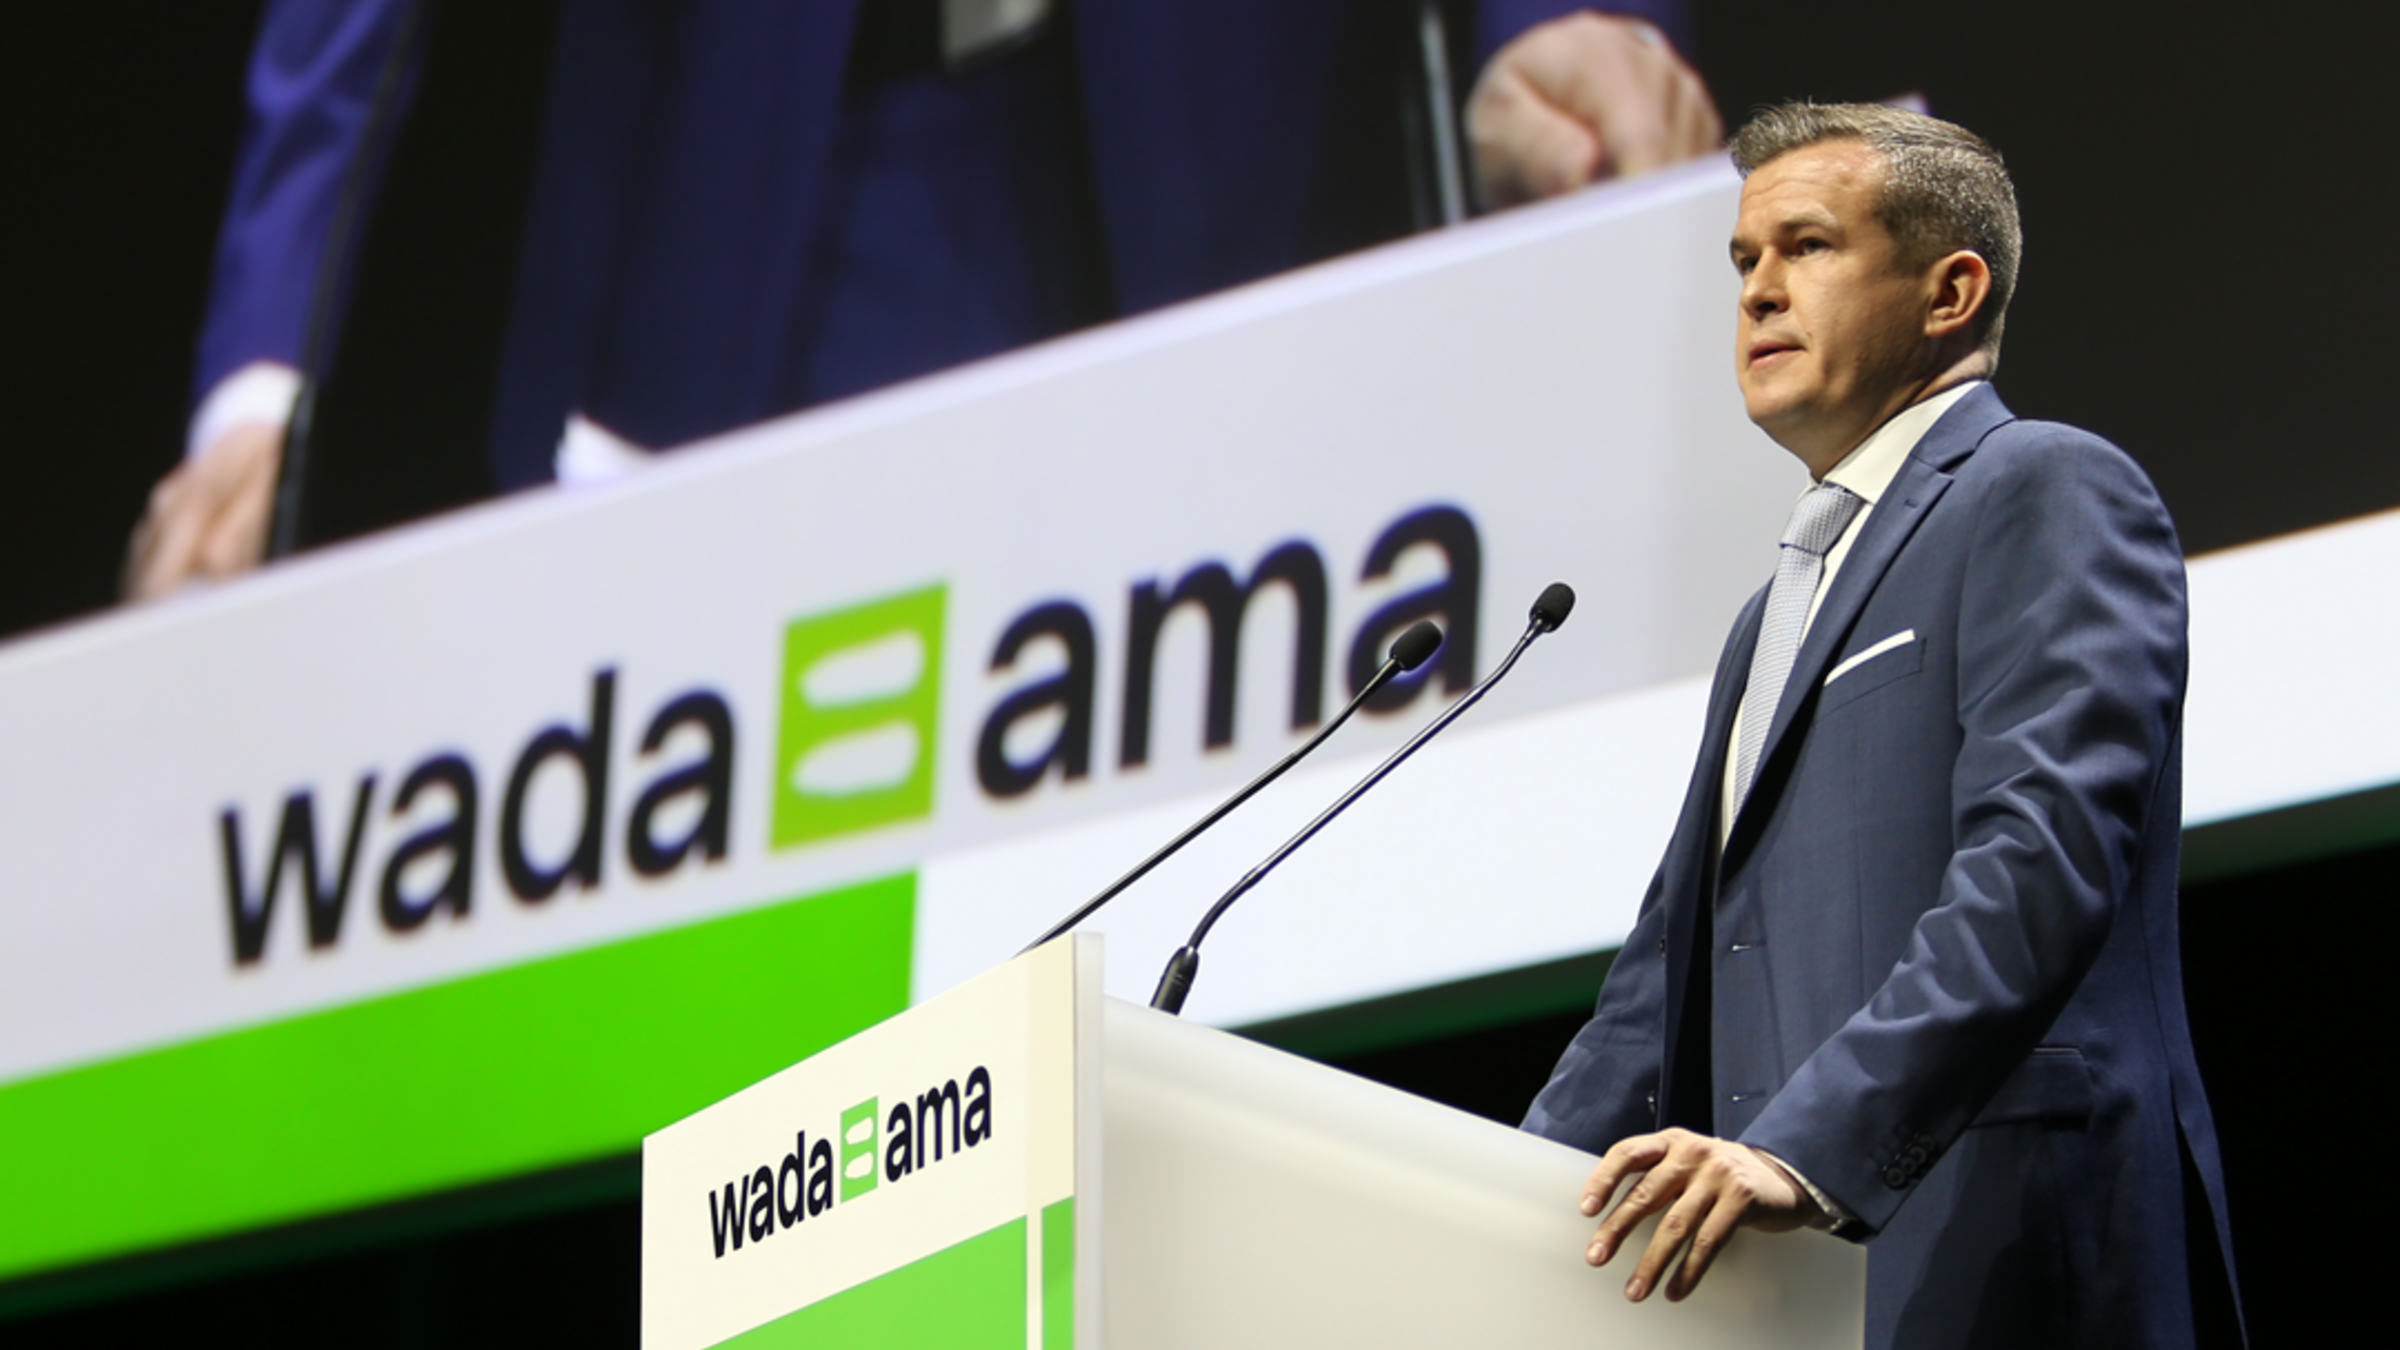 WADA President calls for unity of the anti-doping community at Annual  Symposium | World Anti Doping Agency